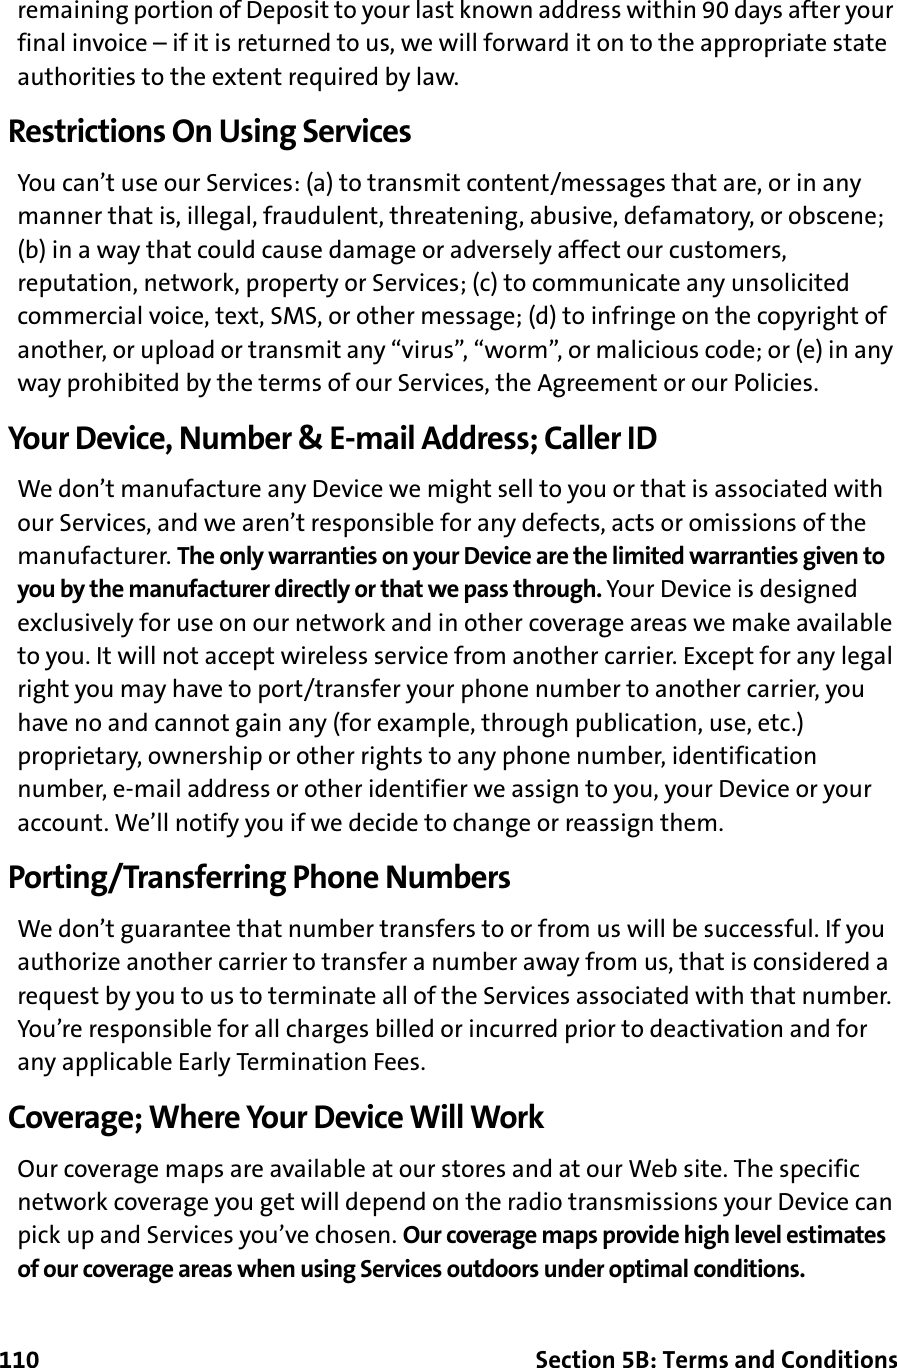 110 Section 5B: Terms and Conditionsremaining portion of Deposit to your last known address within 90 days after your final invoice – if it is returned to us, we will forward it on to the appropriate state authorities to the extent required by law.Restrictions On Using ServicesYou can’t use our Services: (a) to transmit content/messages that are, or in any manner that is, illegal, fraudulent, threatening, abusive, defamatory, or obscene; (b) in a way that could cause damage or adversely affect our customers, reputation, network, property or Services; (c) to communicate any unsolicited commercial voice, text, SMS, or other message; (d) to infringe on the copyright of another, or upload or transmit any “virus”, “worm”, or malicious code; or (e) in any way prohibited by the terms of our Services, the Agreement or our Policies.Your Device, Number &amp; E-mail Address; Caller IDWe don’t manufacture any Device we might sell to you or that is associated with our Services, and we aren’t responsible for any defects, acts or omissions of the manufacturer. The only warranties on your Device are the limited warranties given to you by the manufacturer directly or that we pass through. Your Device is designed exclusively for use on our network and in other coverage areas we make available to you. It will not accept wireless service from another carrier. Except for any legal right you may have to port/transfer your phone number to another carrier, you have no and cannot gain any (for example, through publication, use, etc.) proprietary, ownership or other rights to any phone number, identification number, e-mail address or other identifier we assign to you, your Device or your account. We’ll notify you if we decide to change or reassign them.Porting/Transferring Phone NumbersWe don’t guarantee that number transfers to or from us will be successful. If you authorize another carrier to transfer a number away from us, that is considered a request by you to us to terminate all of the Services associated with that number. You’re responsible for all charges billed or incurred prior to deactivation and for any applicable Early Termination Fees.Coverage; Where Your Device Will WorkOur coverage maps are available at our stores and at our Web site. The specific network coverage you get will depend on the radio transmissions your Device can pick up and Services you’ve chosen. Our coverage maps provide high level estimates of our coverage areas when using Services outdoors under optimal conditions. 